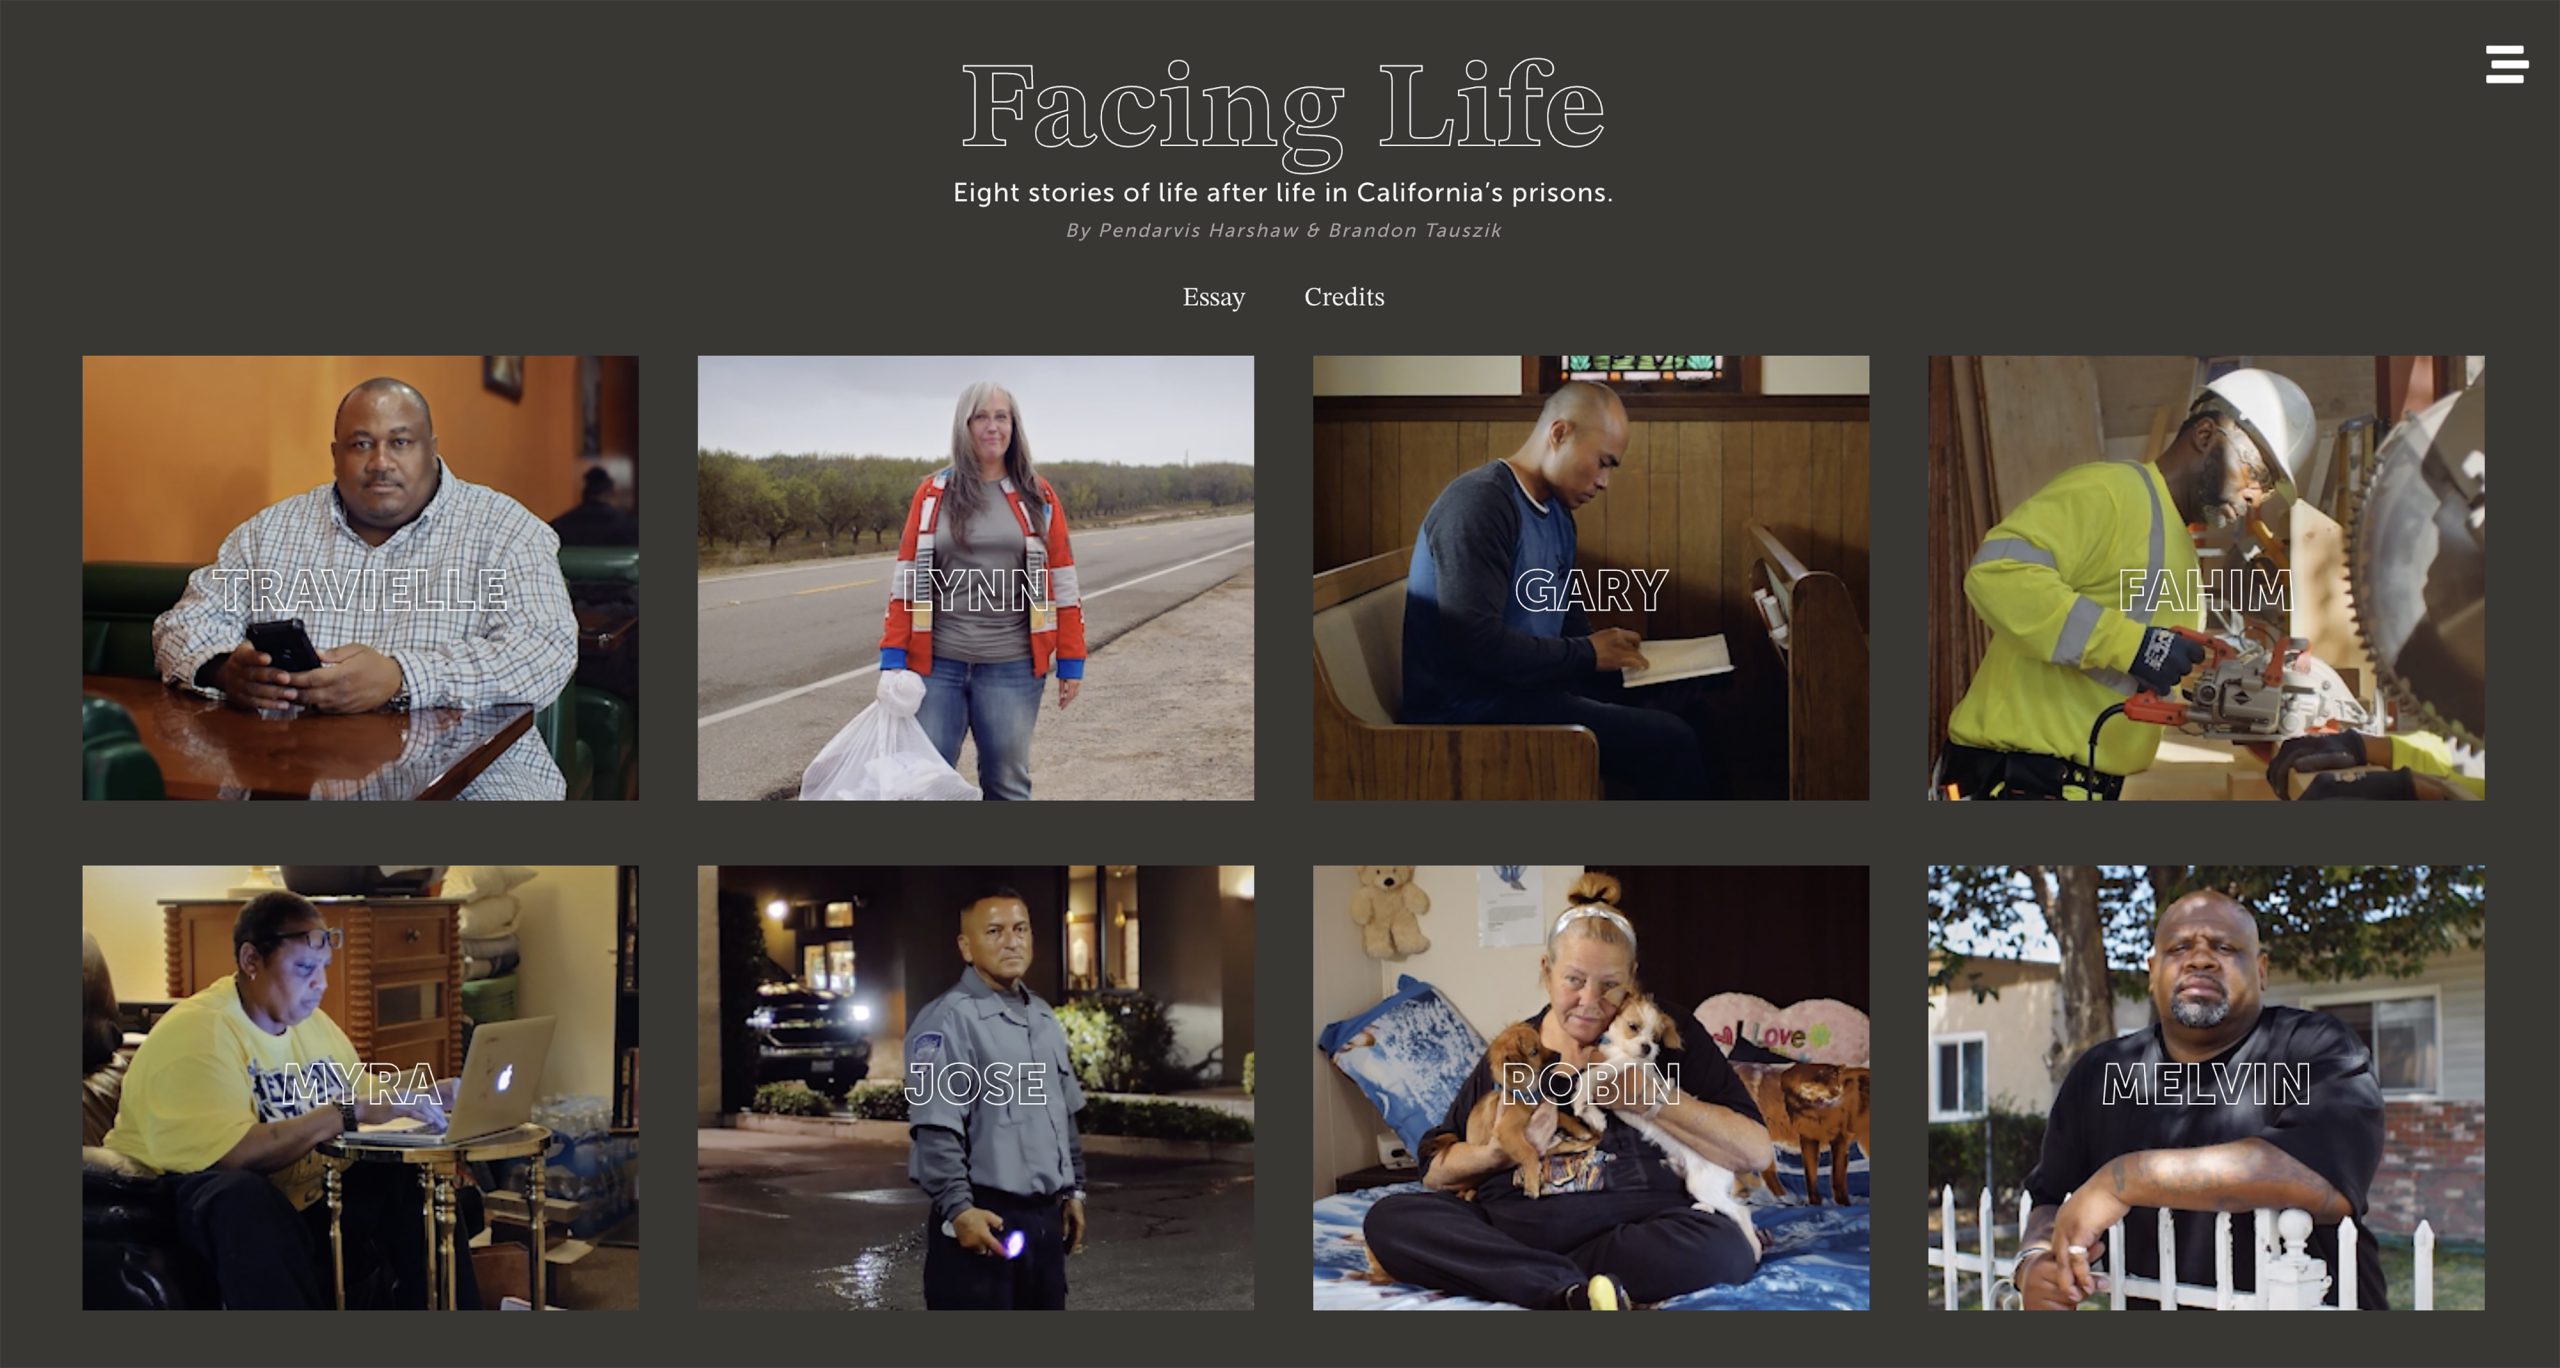 Screenshot of website for Facing Life with two rows of thumbnail photographs of people who have been released from incarceration with life sentences. The photographs show each in daily activities as they work to reintegrate after incarceration.